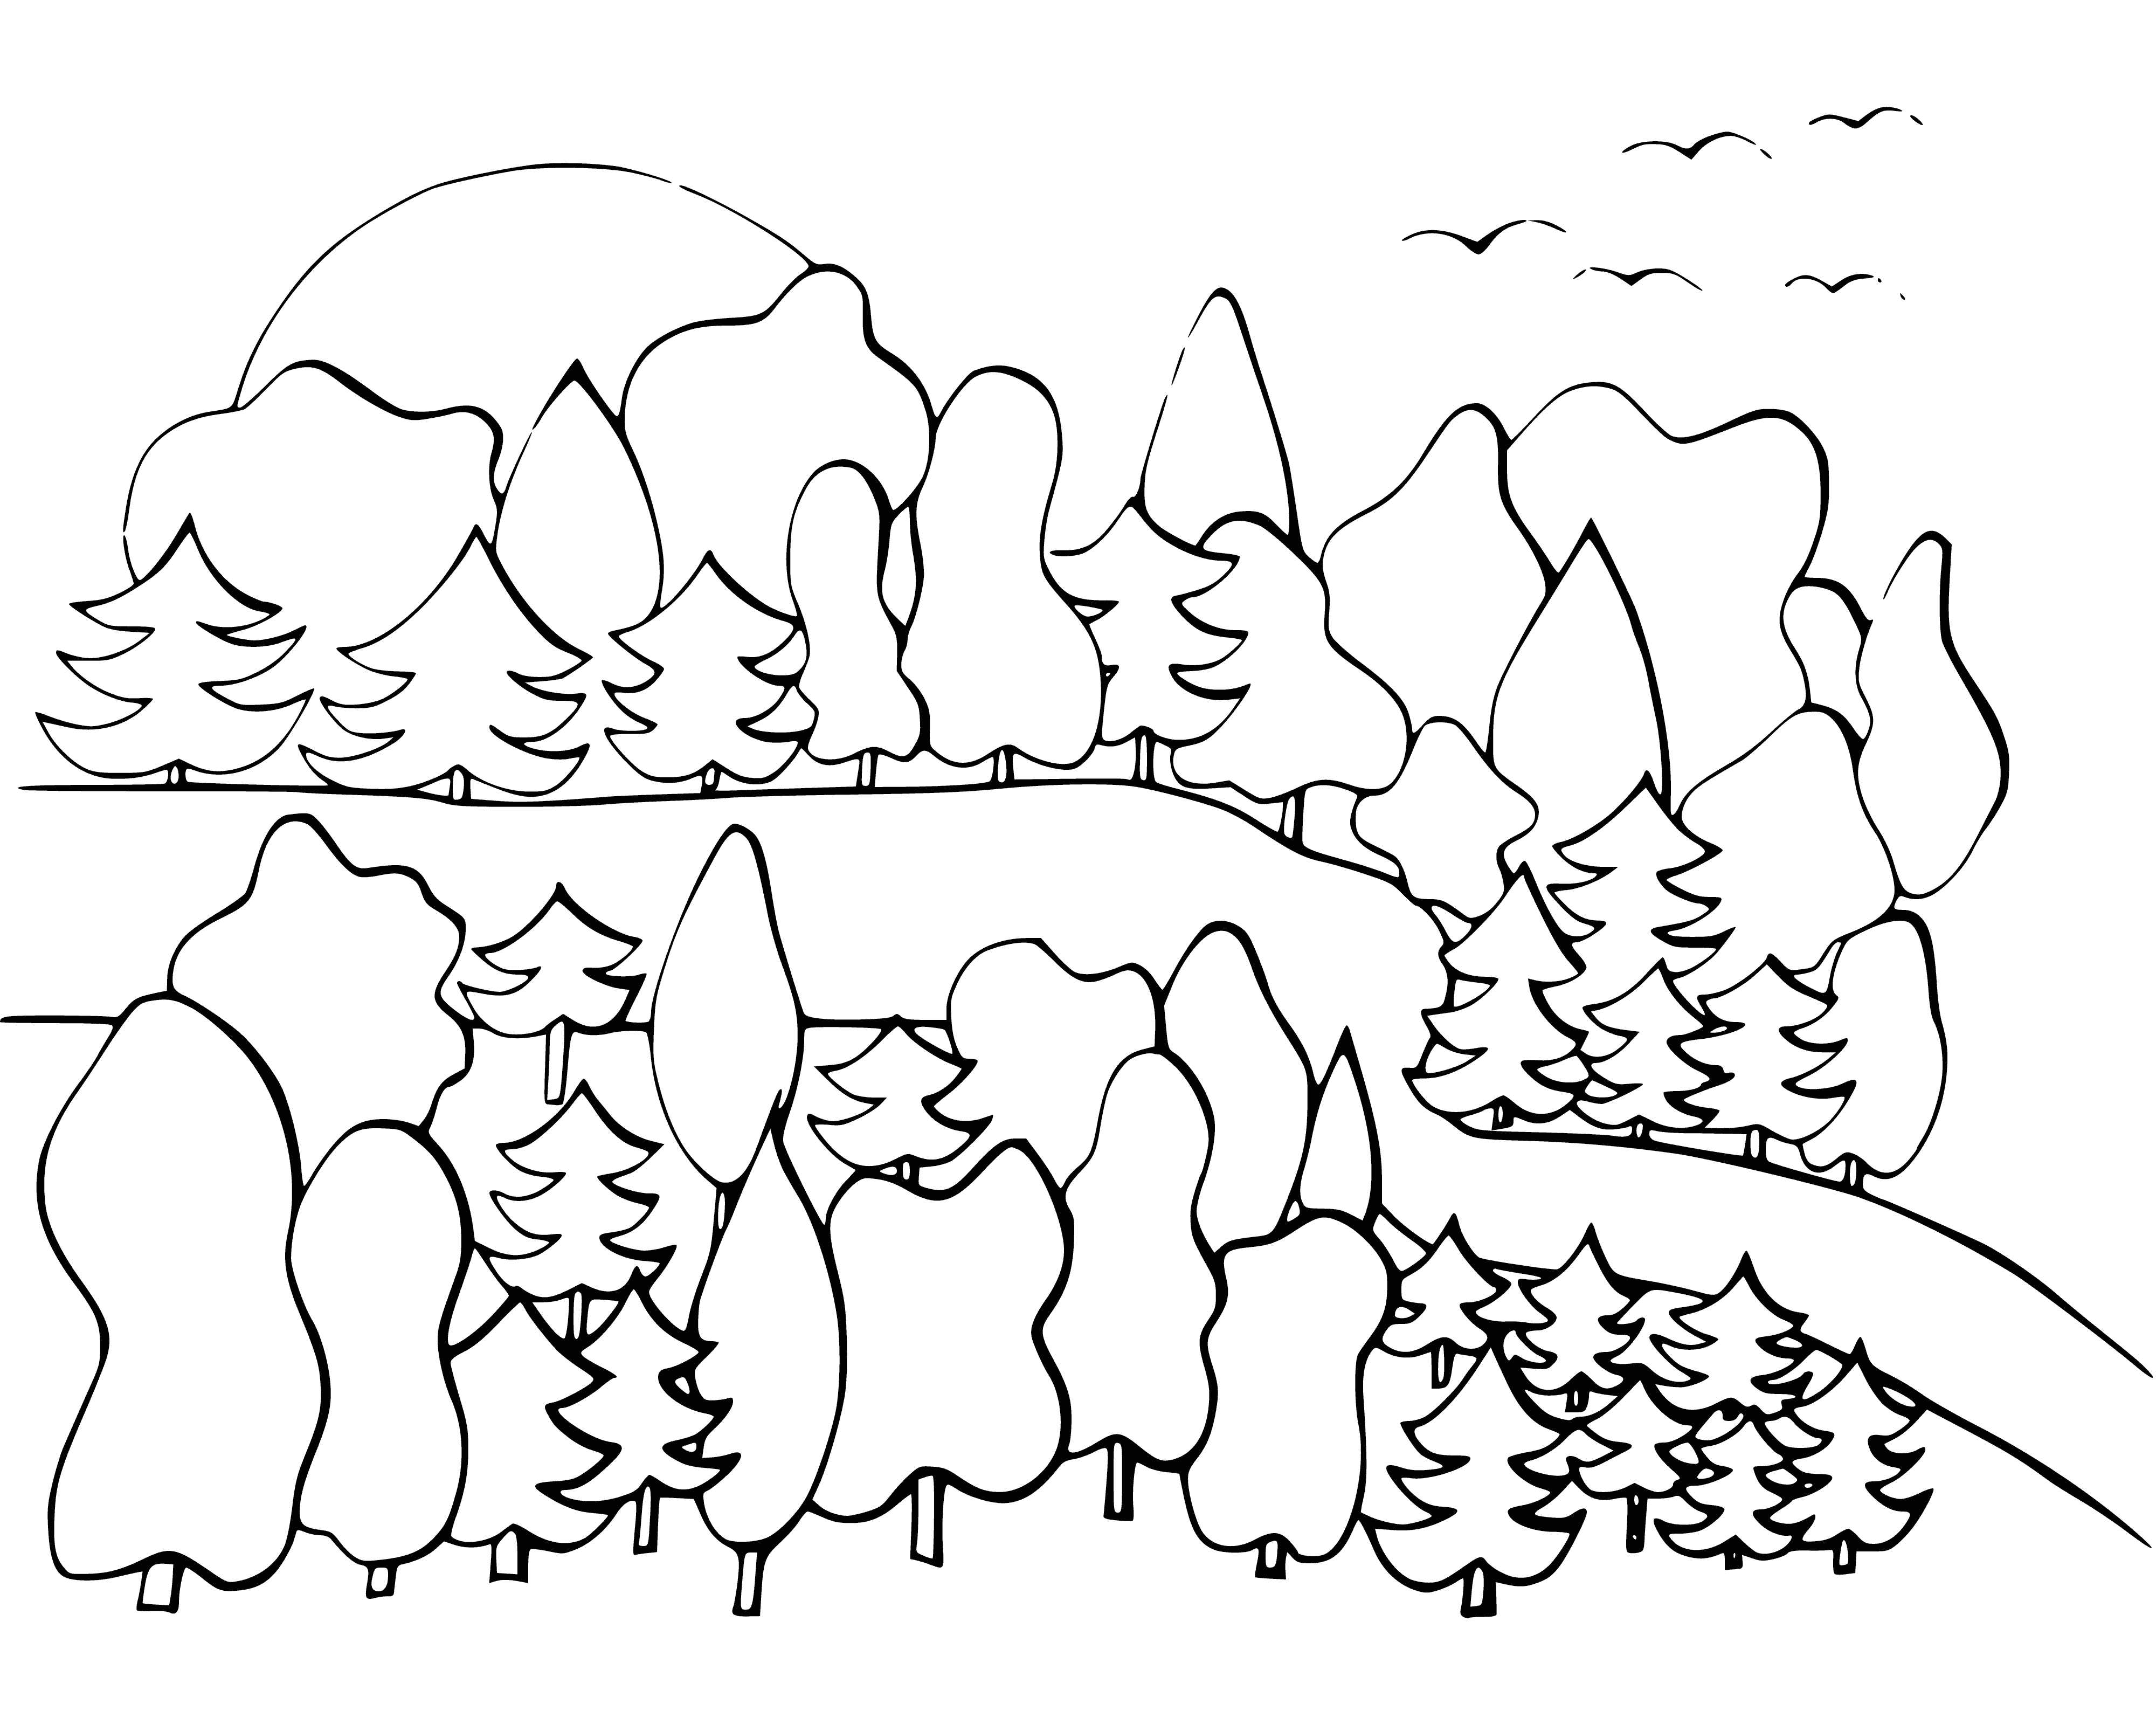 coloring page: A dense forest w/ tall trees; their canopy prevents much light from shining through; the ground is covered in dead plant matter.